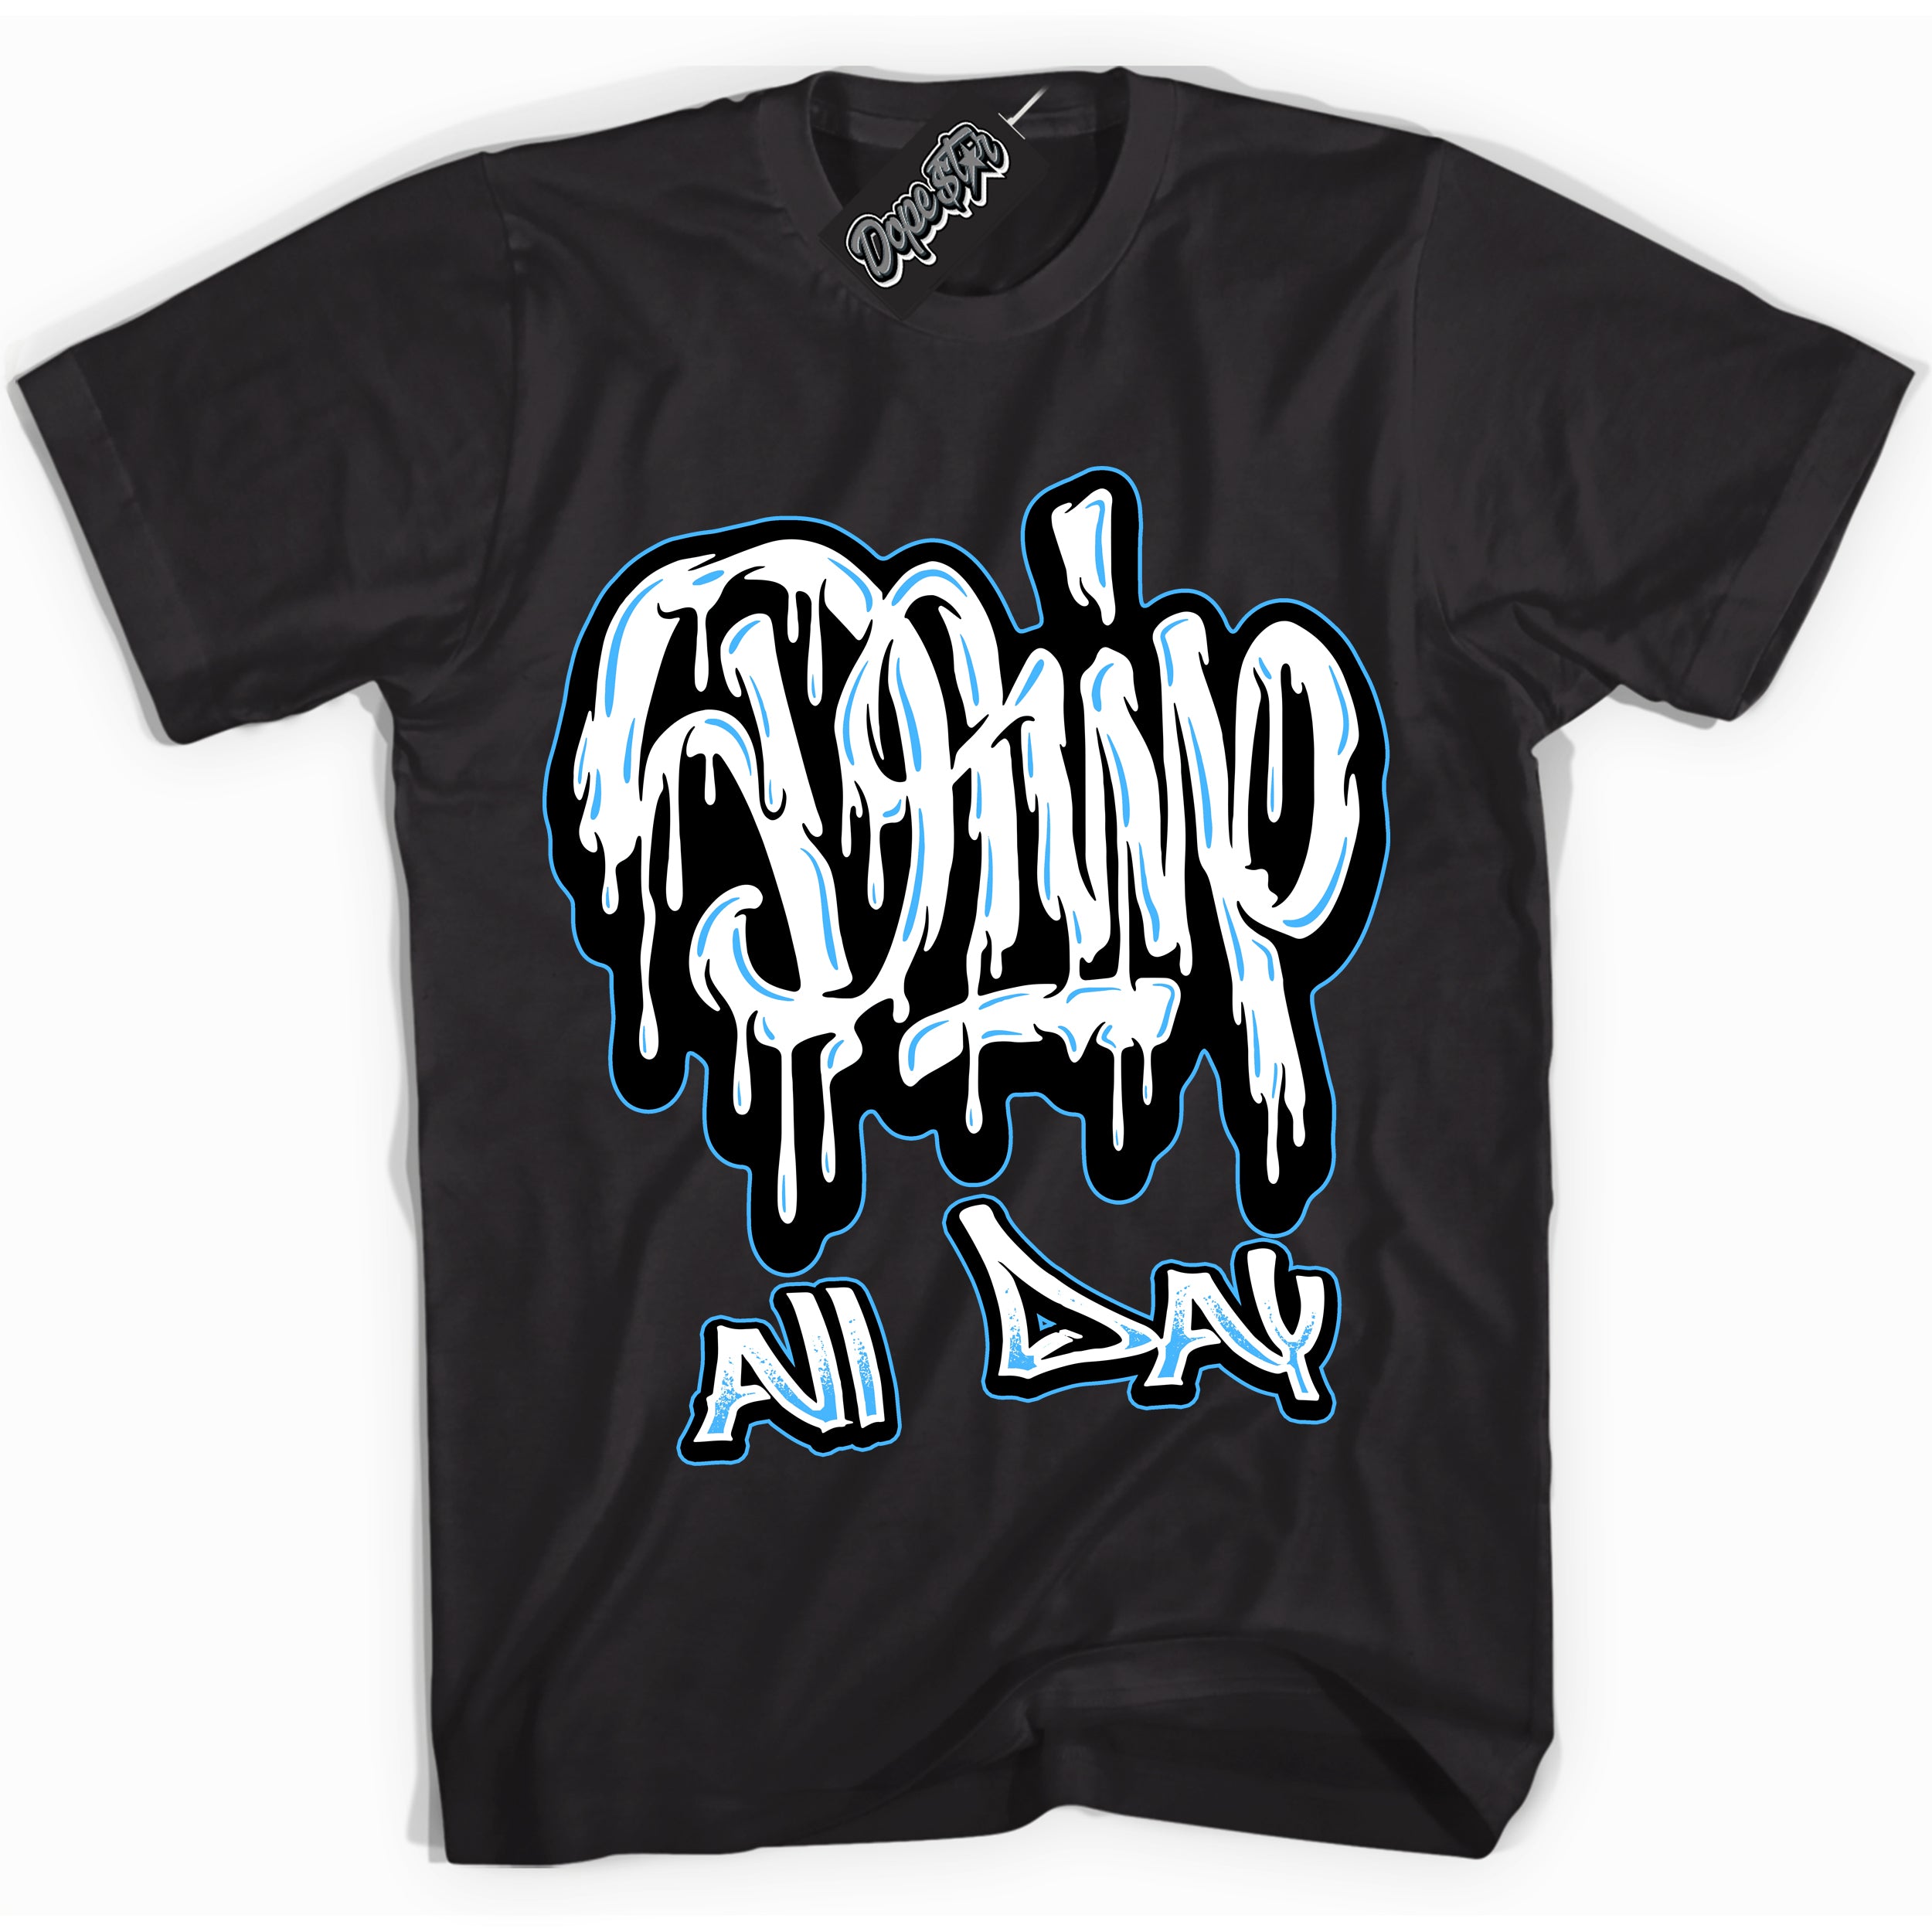 Cool Black graphic tee with “ Drip All Day ” design, that perfectly matches Powder Blue 9s sneakers 